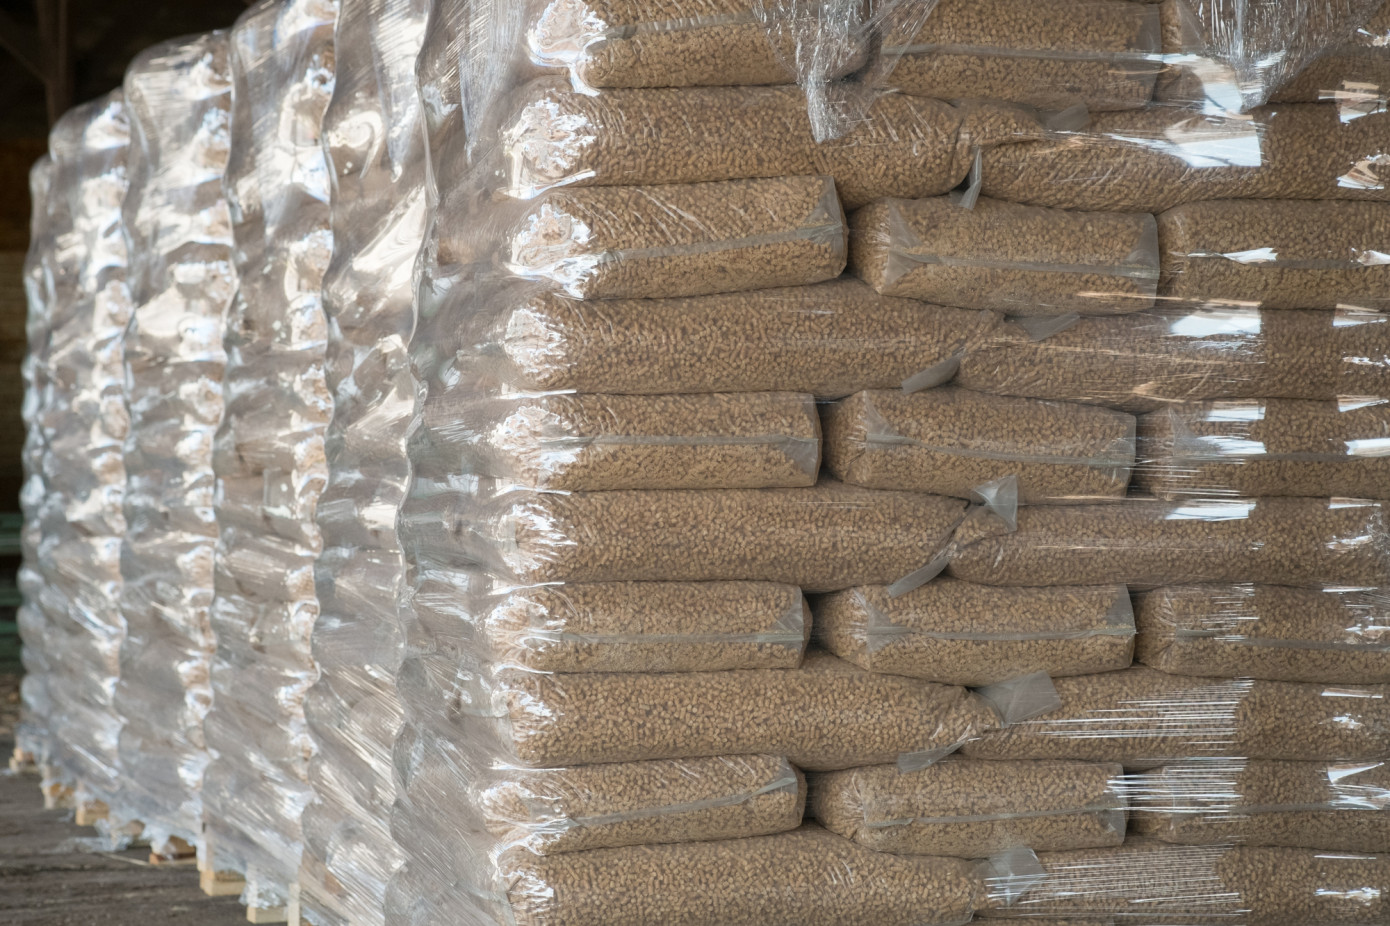 Imports of wood pellets to Japan shoot 56% in October